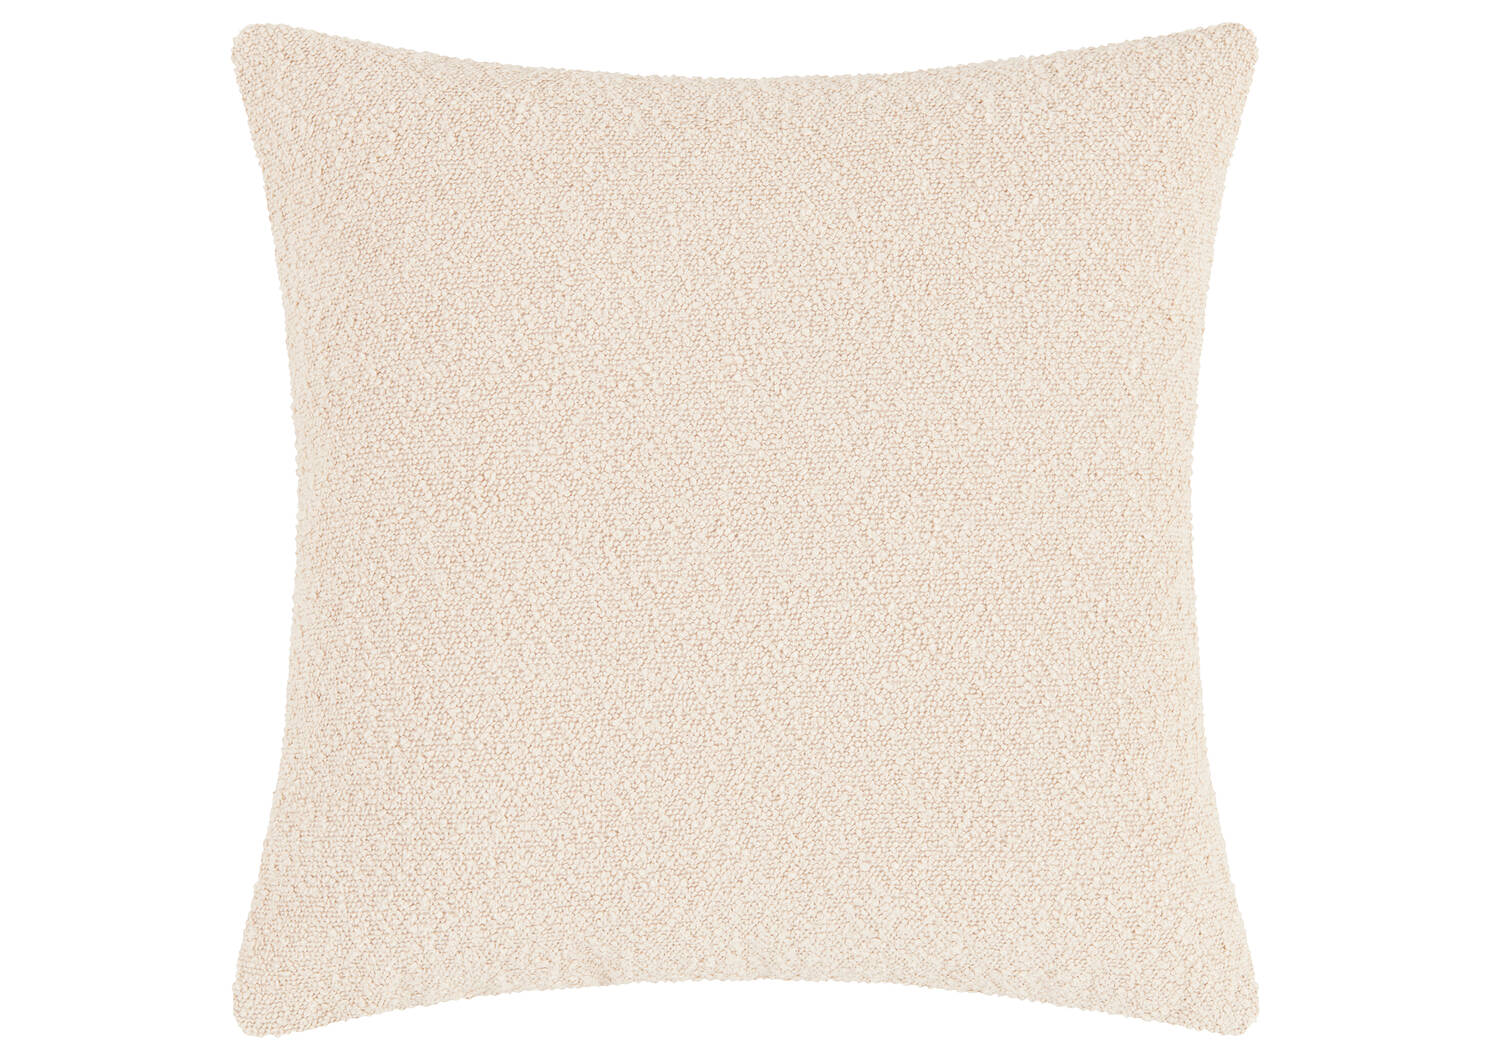 Coussin Joanie 20x20 sable